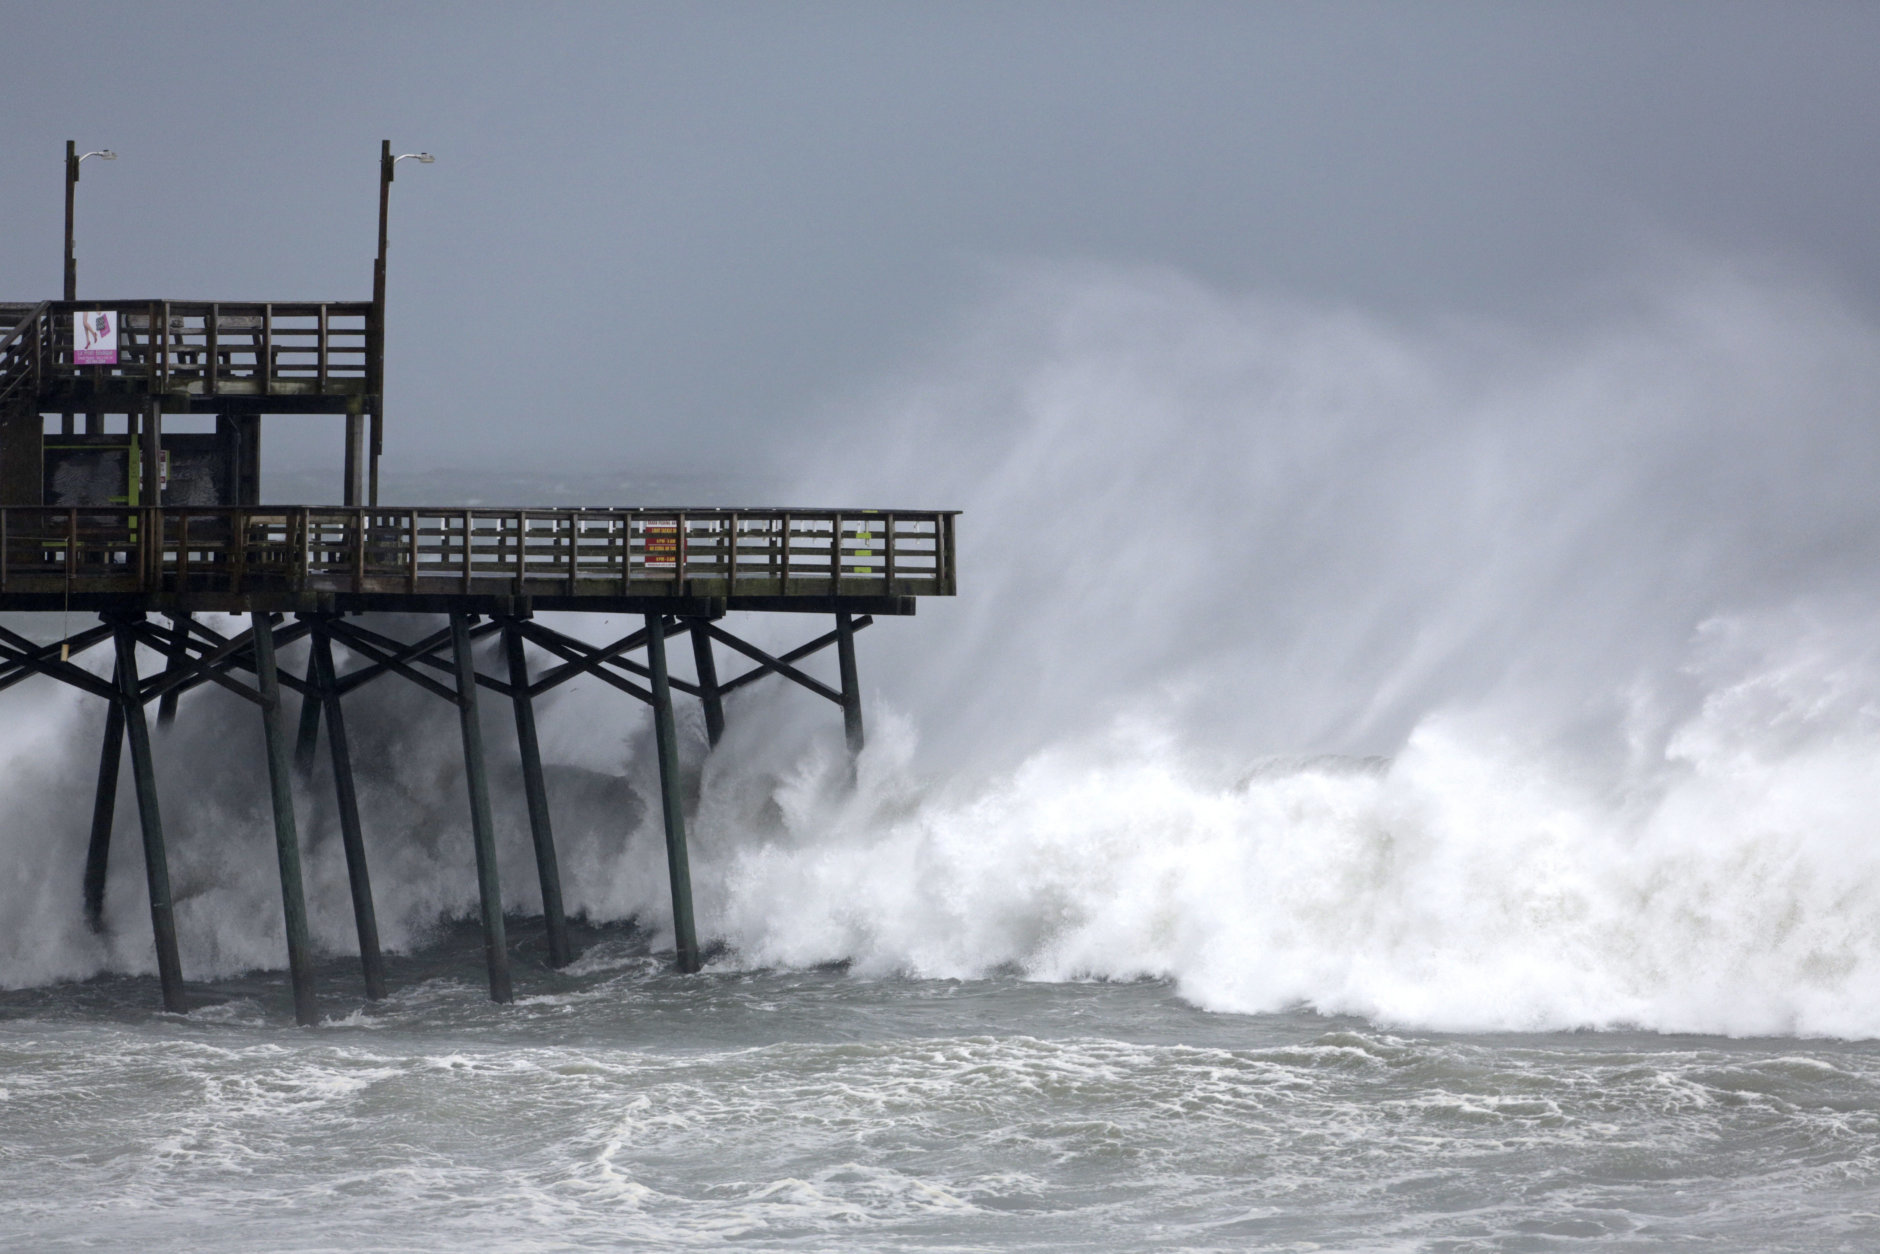 Waves from Hurricane Florence pound the Bogue Inlet Pier in Emerald Isle N.C., Thursday, Sept. 13, 2018. (AP Photo/Tom Copeland)